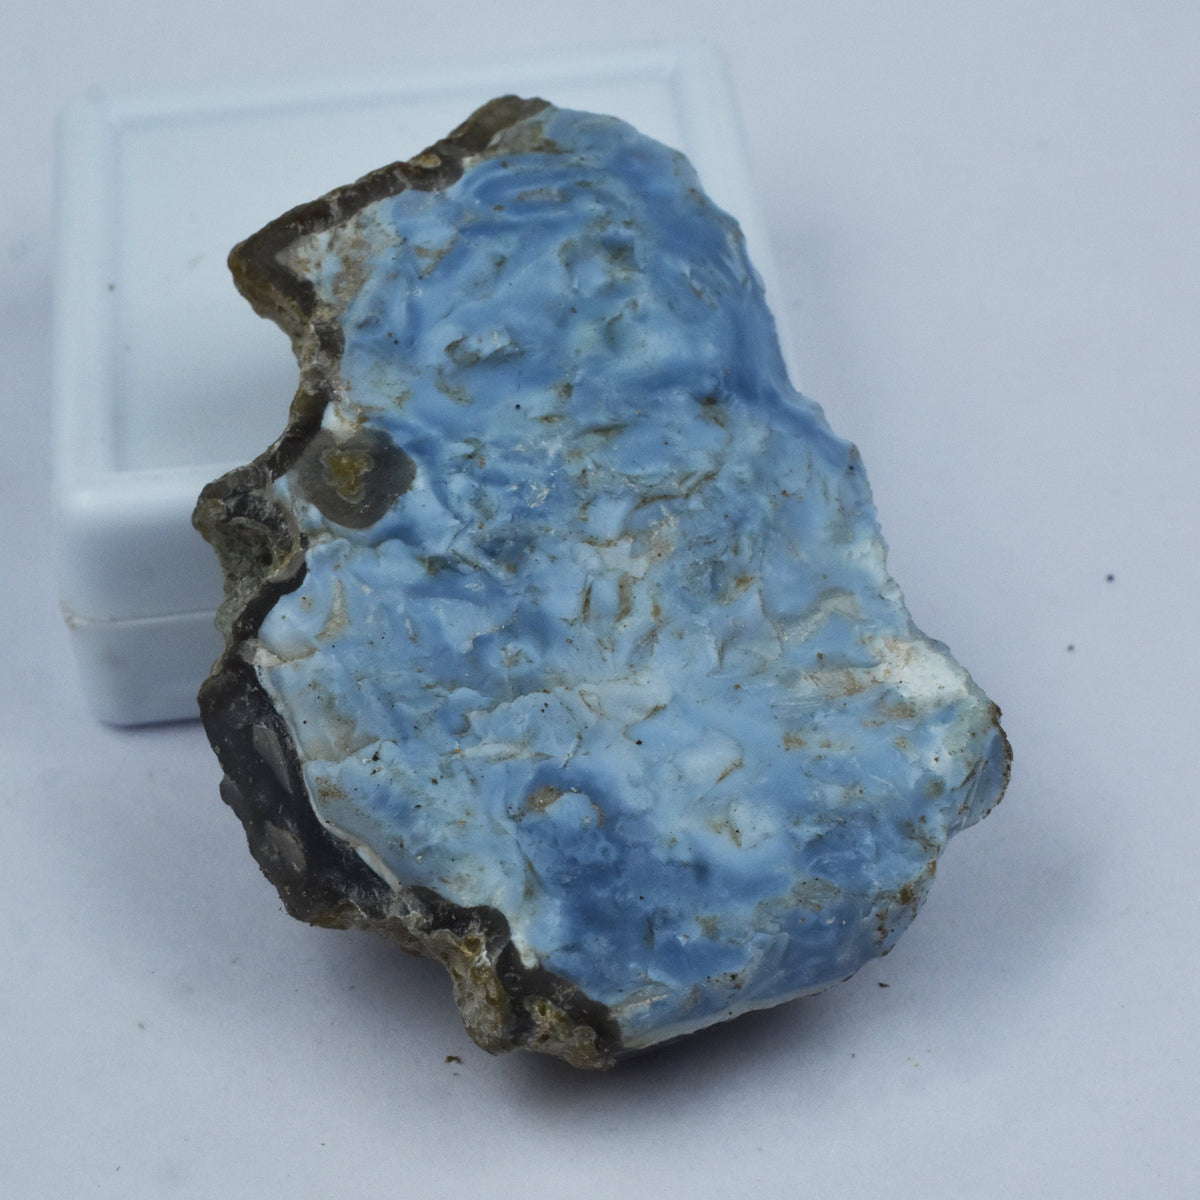 Winter Discount Offer !! Blue Opal Rough 150-190 Carat Australian Natural Loose Gemstone Certified Row Rough Chunk Uncut Healing Earth mined High-Quality Winter Best Offer